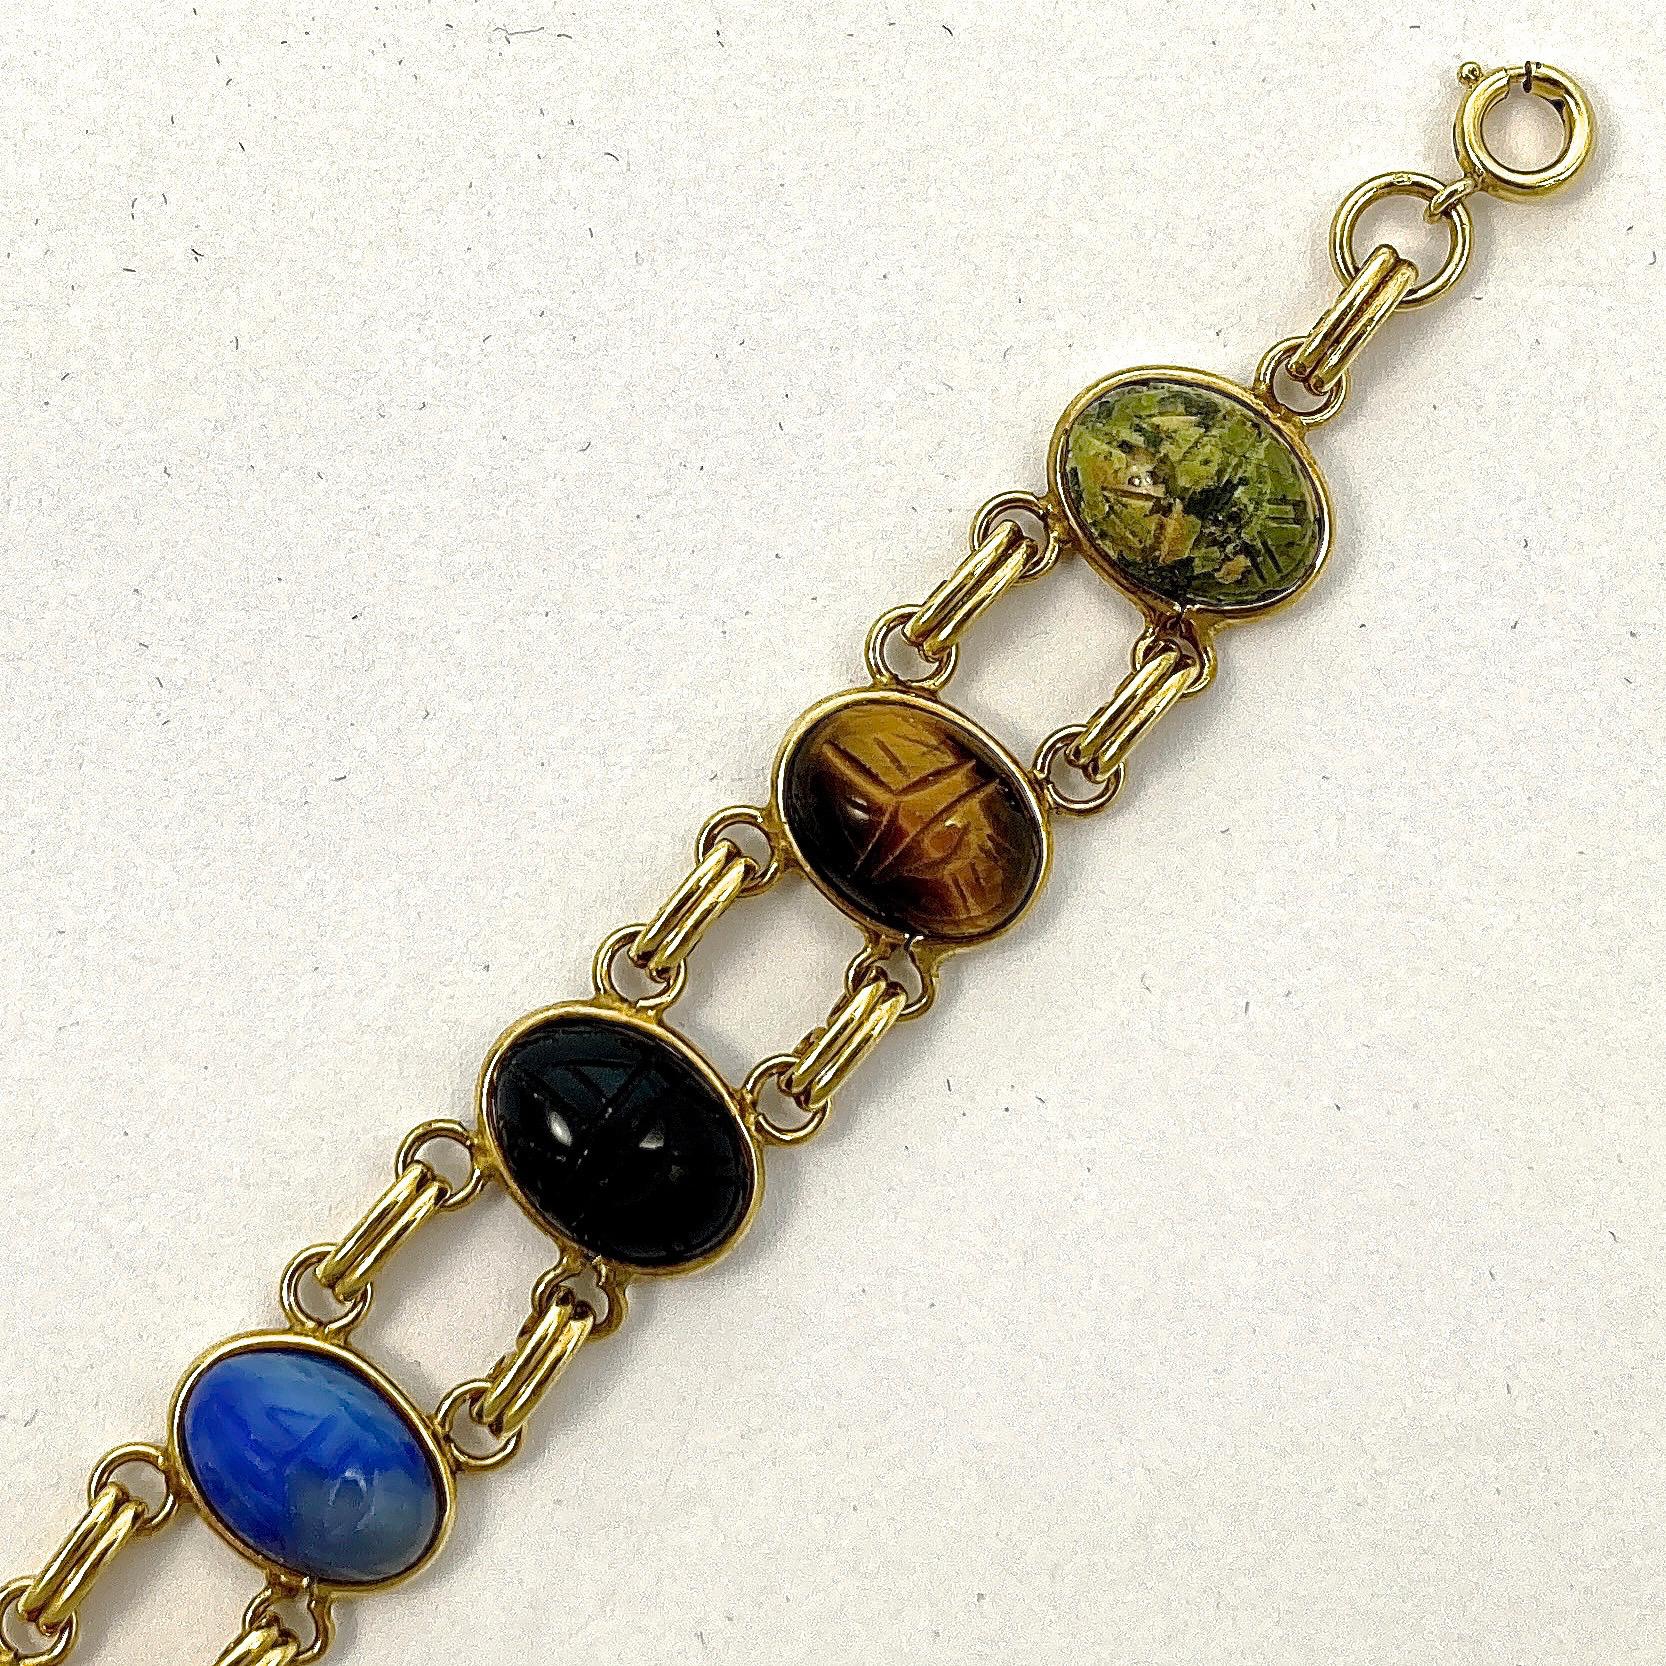 12K gold filled vintage bracelet with a safety chain, featuring engraved scarabs on semi precious stones, including tiger eye, black onyx, and carnelian. Length 17.8cm / 7 inches by width 1.45cm / .57 inch. The bracelet is in very good condition.